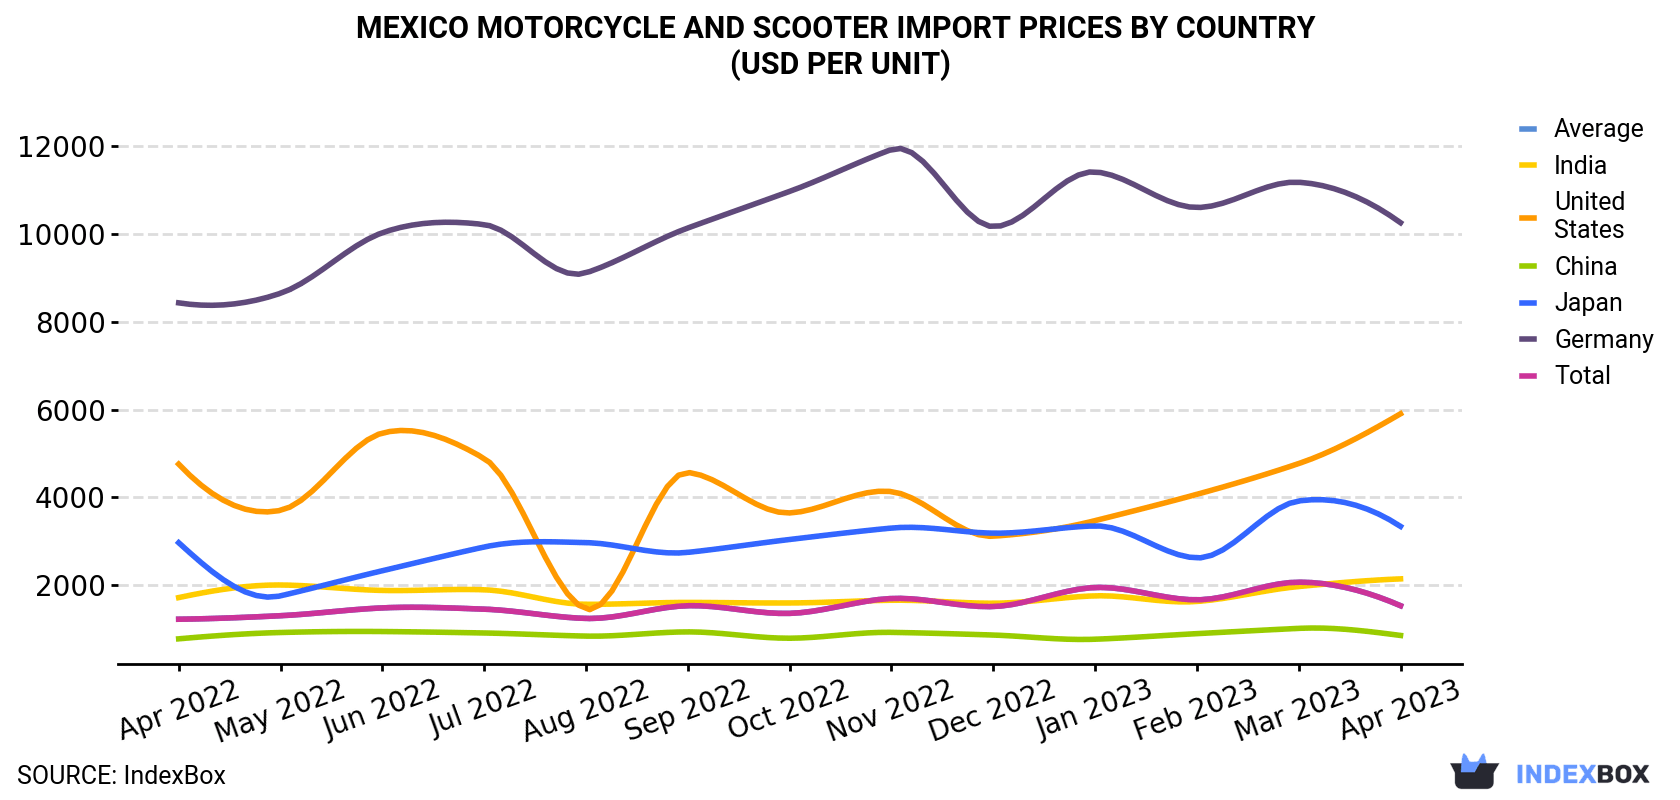 Mexican Motorcycle And Scooter Prices Drop By 26%, Now at $1,538 per Unit On  Average - News and Statistics - IndexBox